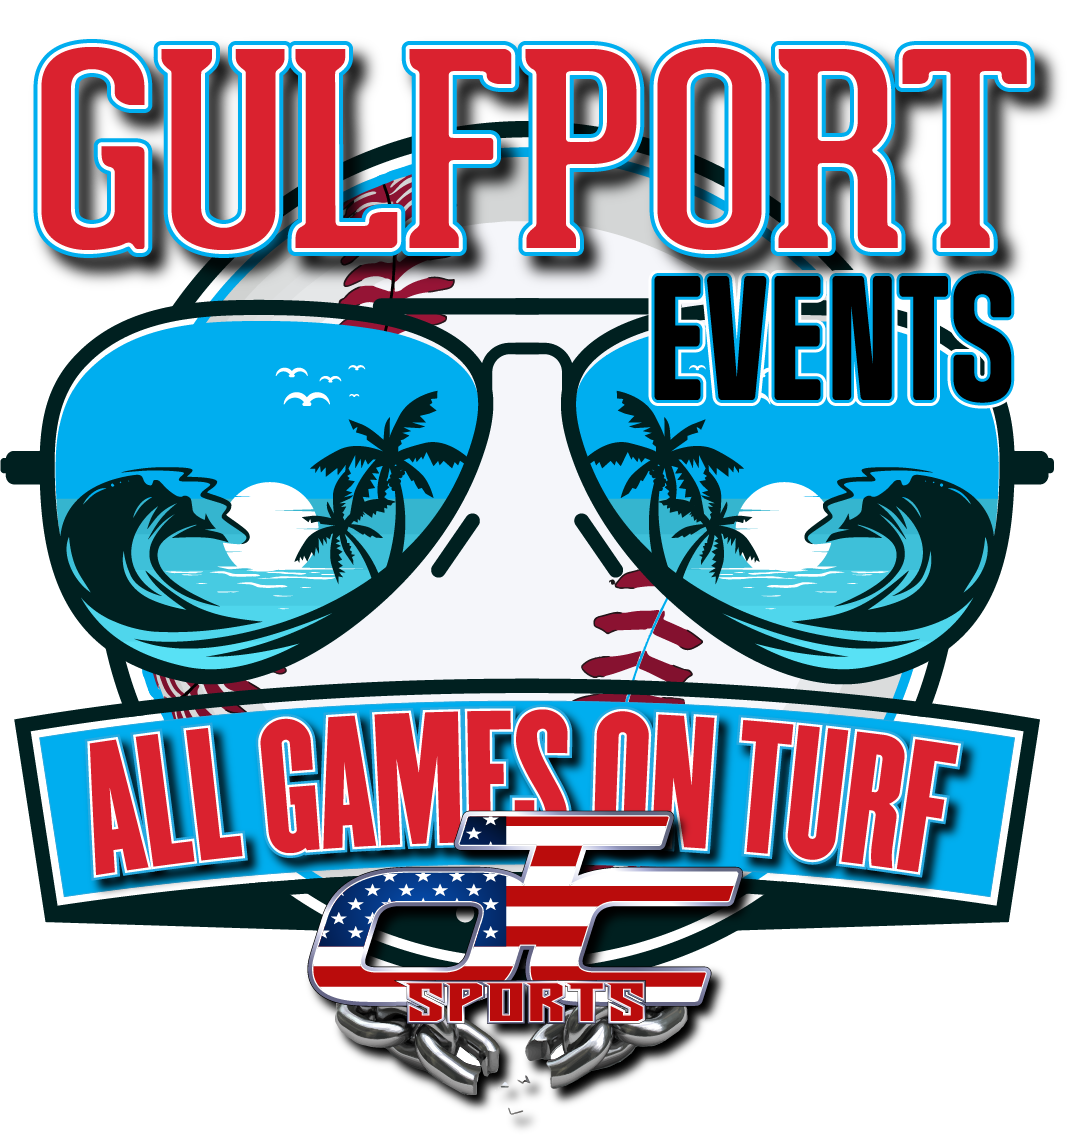 Gulfport Turf Event! All Games On Turf! Leather Championship Belt Awards! Logo